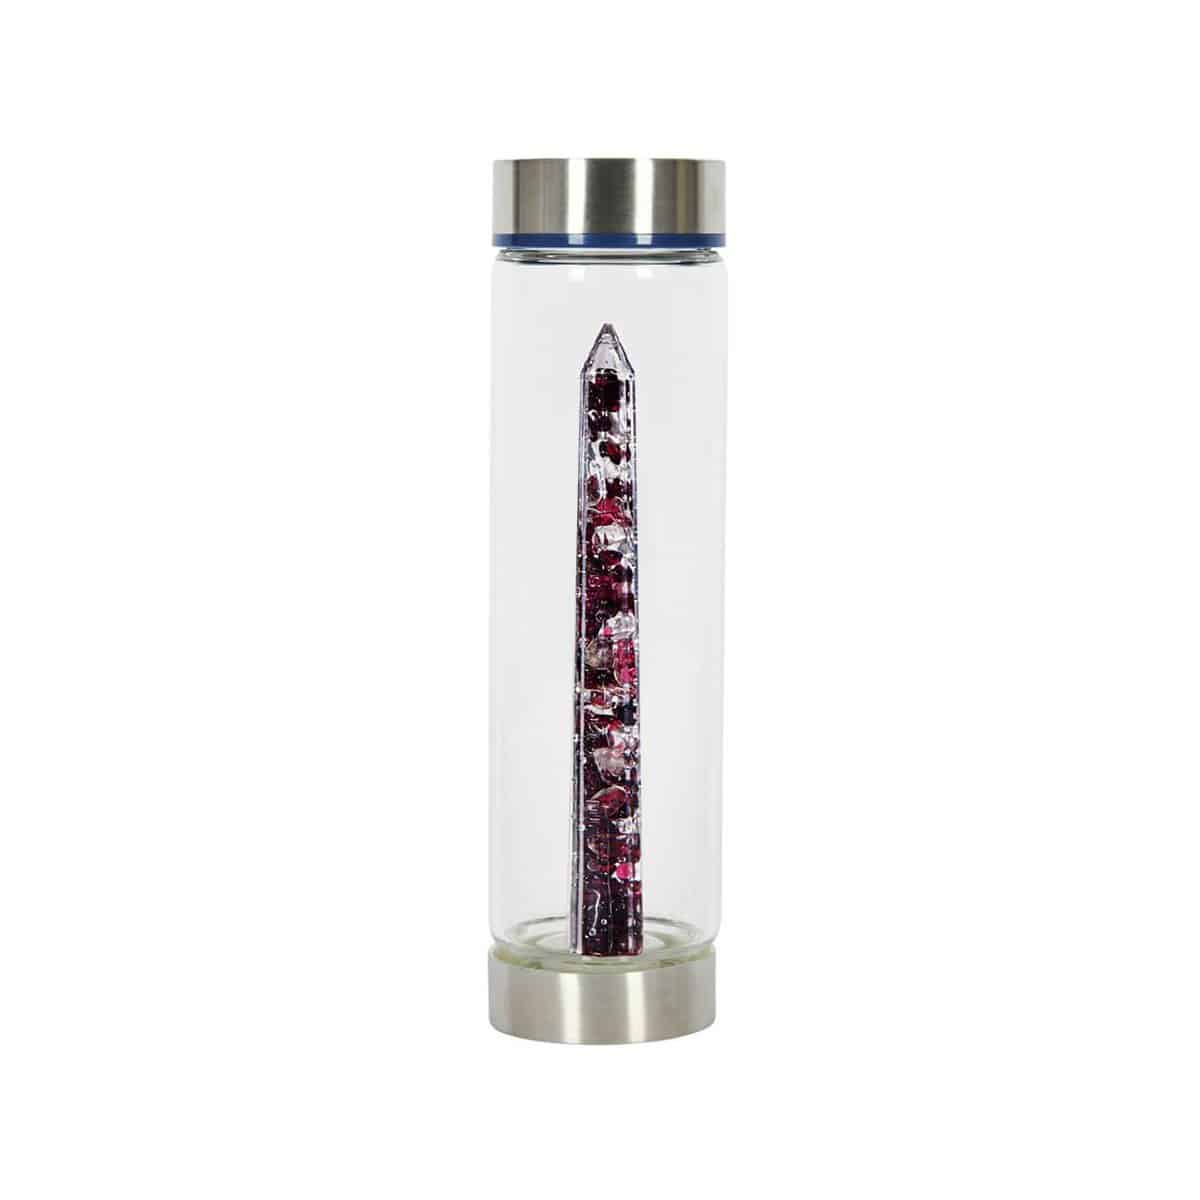 Crystal & Gemstone Water Bottles - Passion - illuminations Wellbeing Shop 